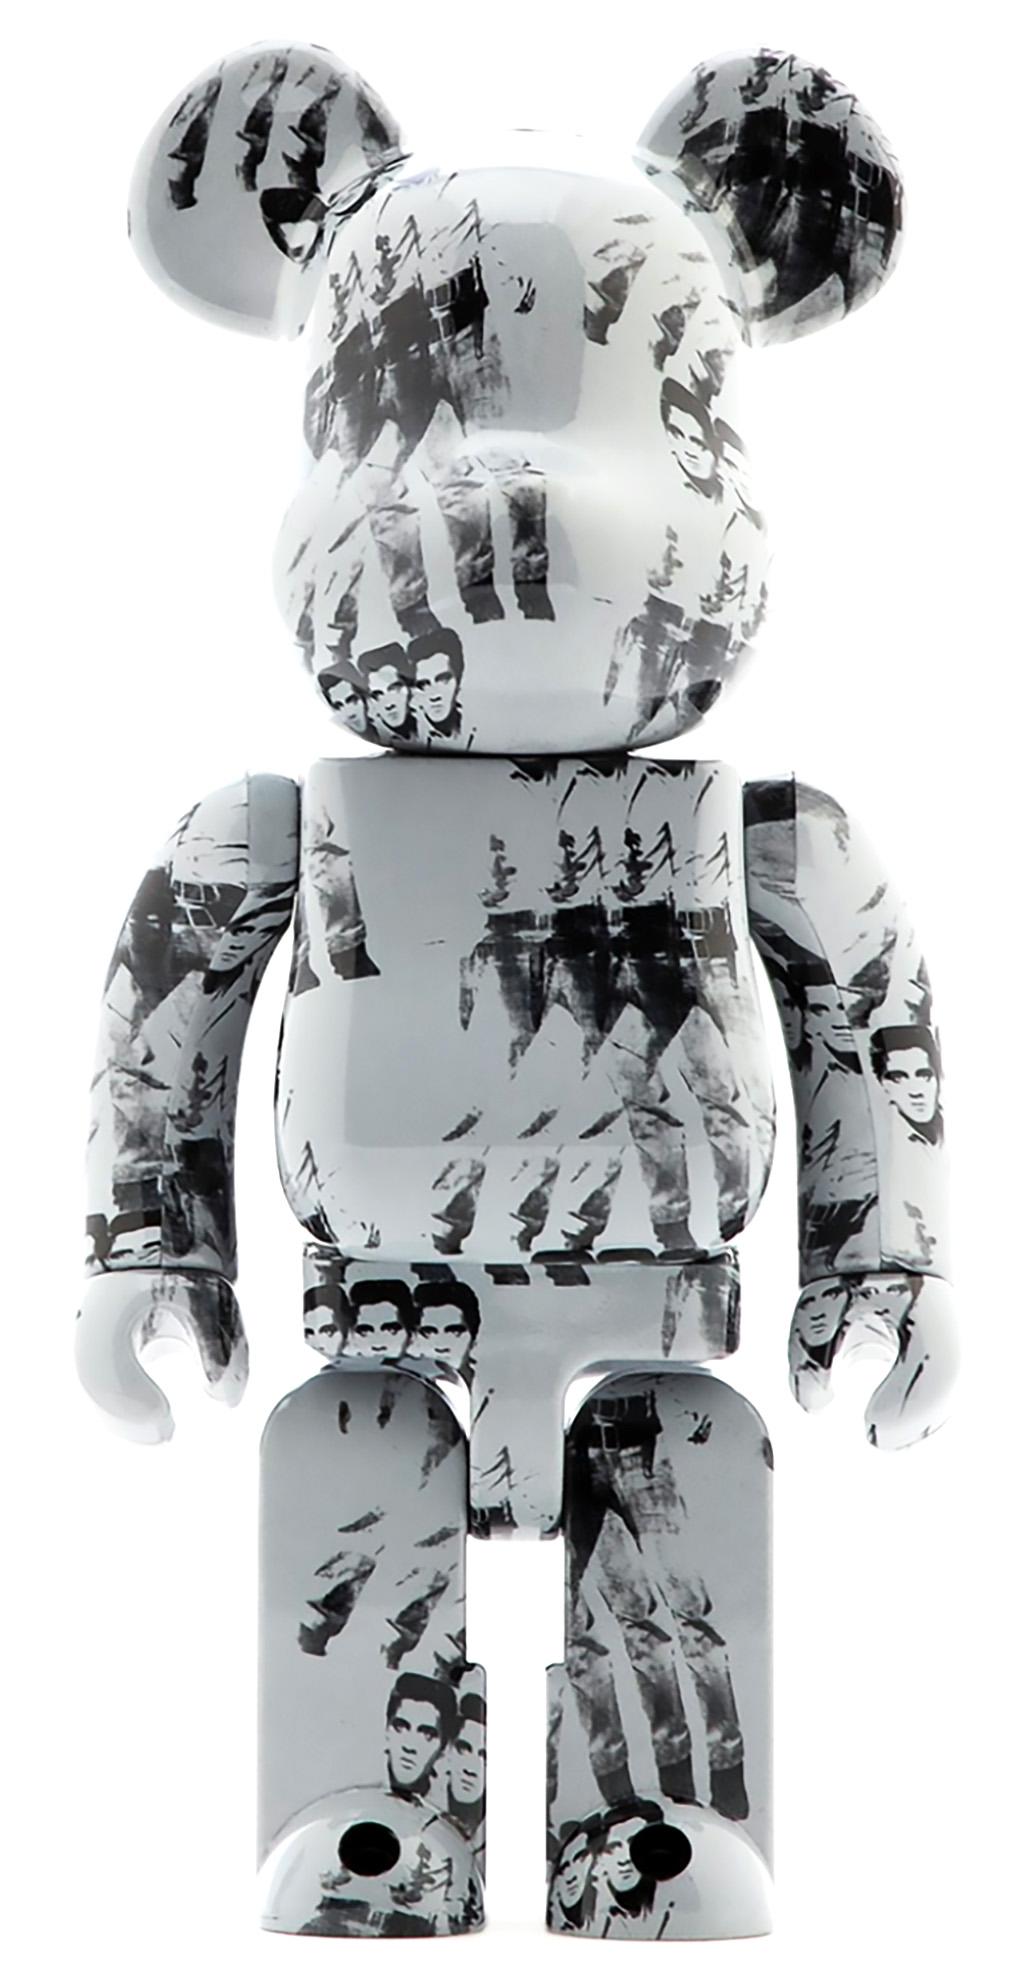 Andy Warhol Bearbrick 400% set of 4 works (Warhol BE@RBRICK) - Contemporary Sculpture by (after) Andy Warhol